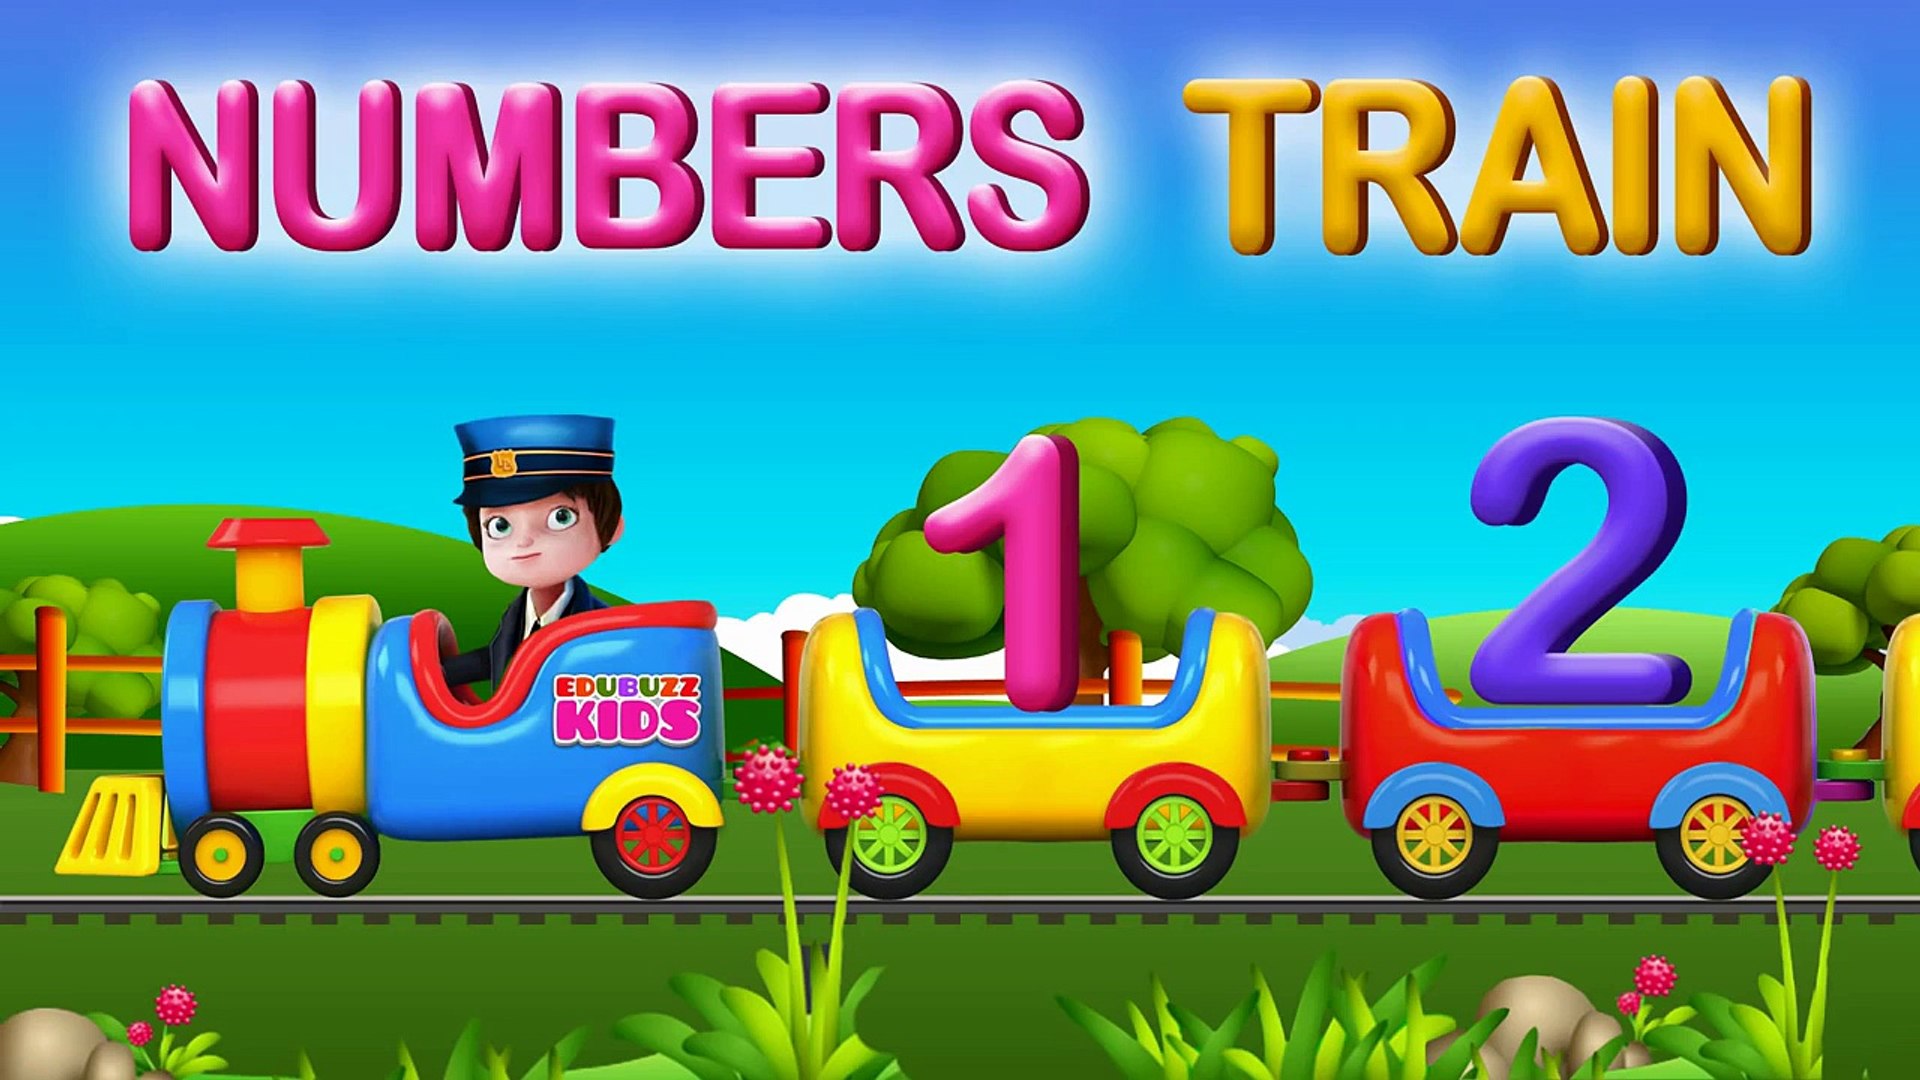 The Number Train Video Learning Numbers 1 to 10 for Kids - Dailymotion Video